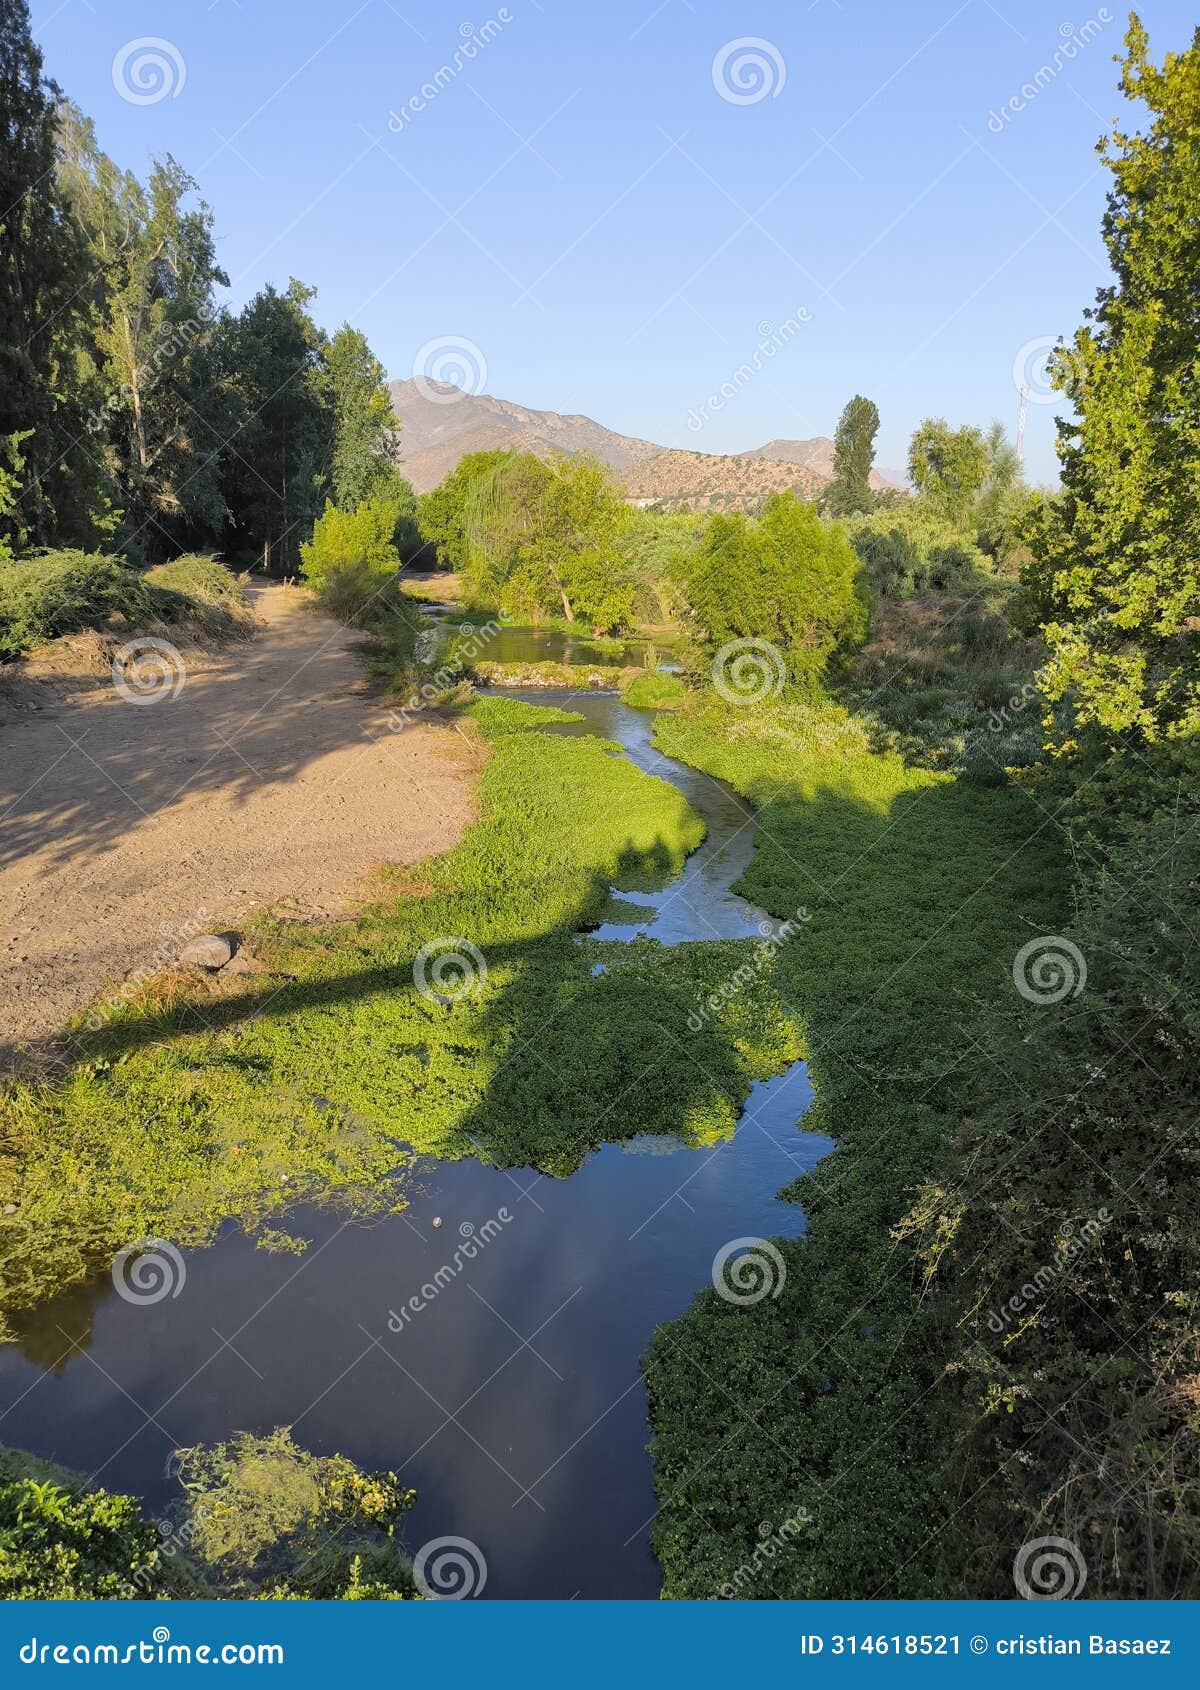 the river or estuary of catemu with its little water and great vegetation, trees and grass, summer afternoon, amateur photography